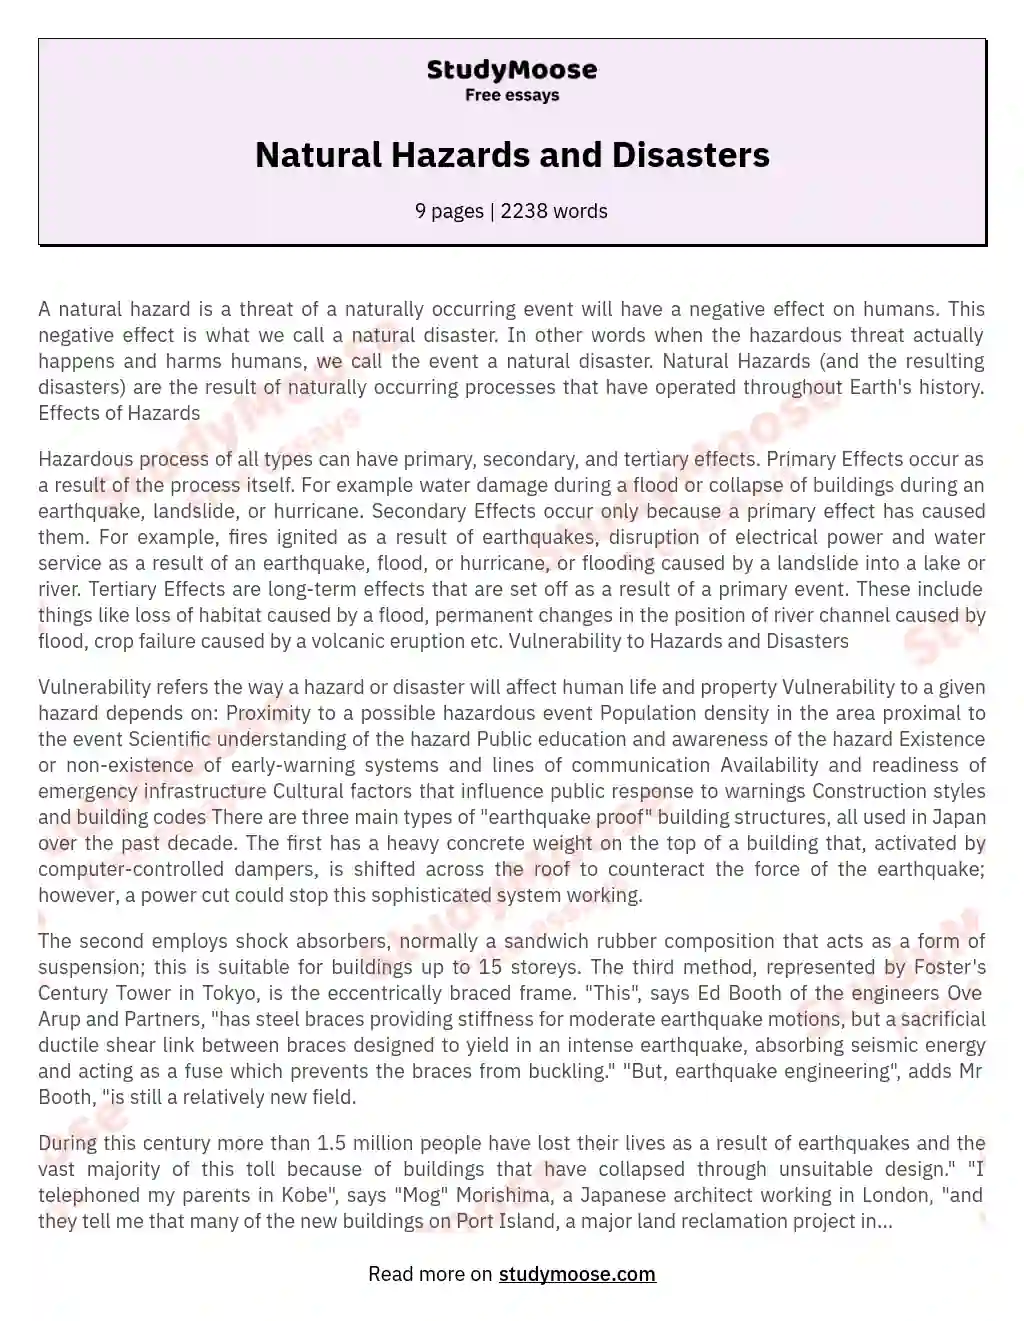 Natural Hazards and Disasters essay